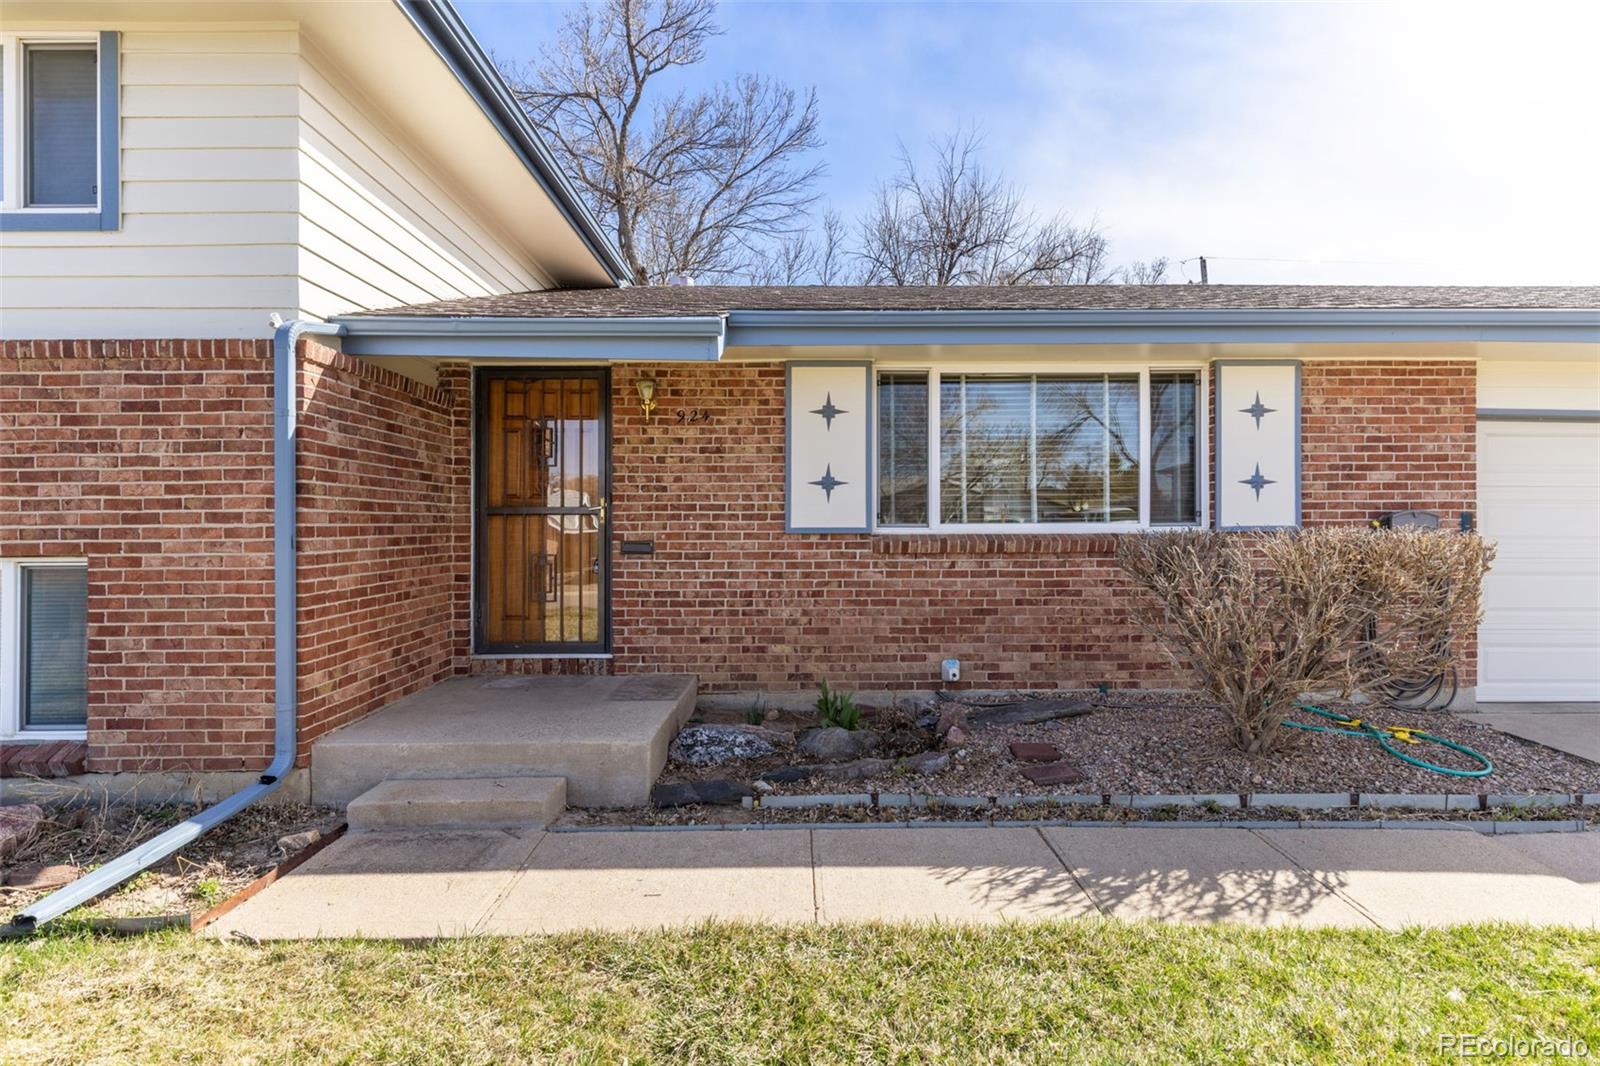 Report Image for 924 W 101st Place,Northglenn, Colorado